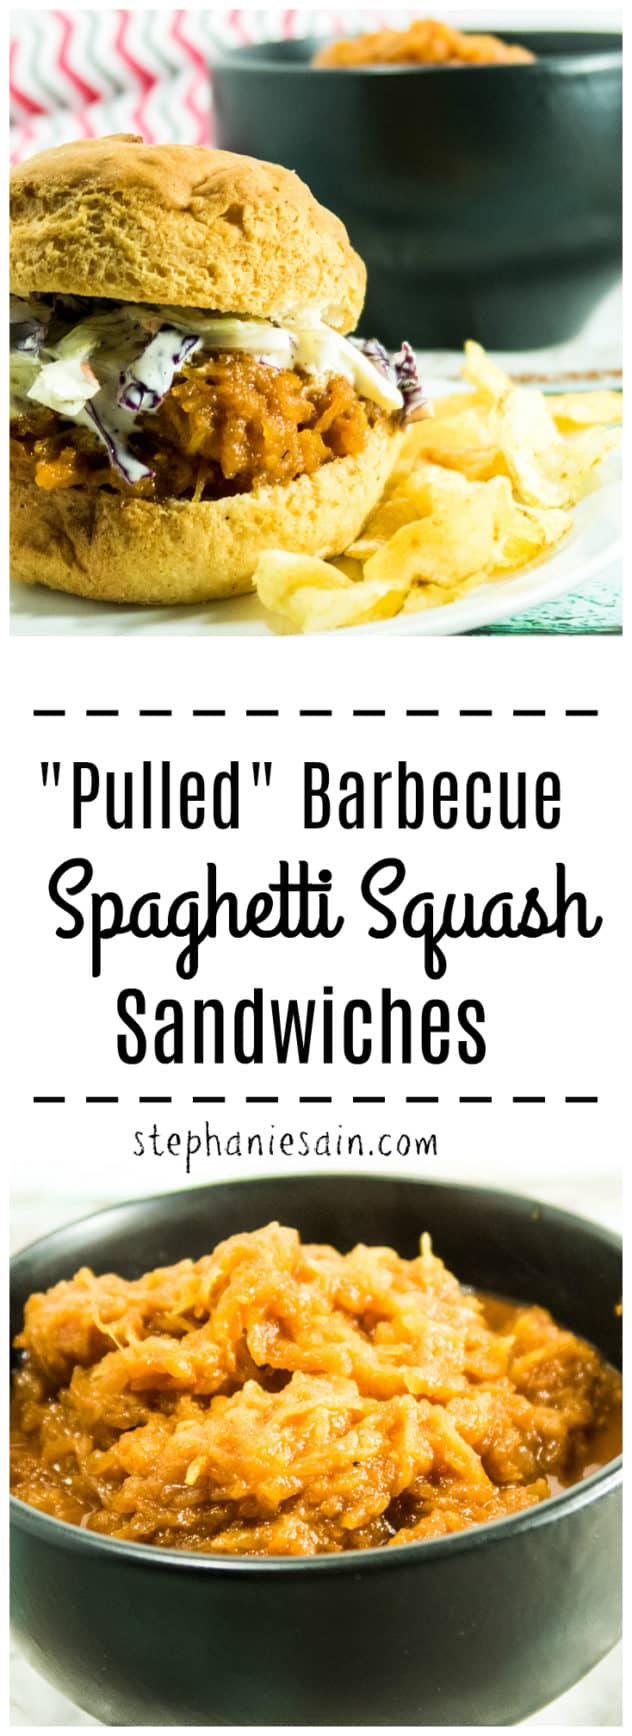 "Pulled" Barbecue Spaghetti Squash Sandwiches are a great vegetarian, vegan option for barbecue. Made with homemade BBQ sauce and topped with crunchy coleslaw. The perfect addition for a cookout or anytime. Gluten Free, Vegetarian, Vegan option.